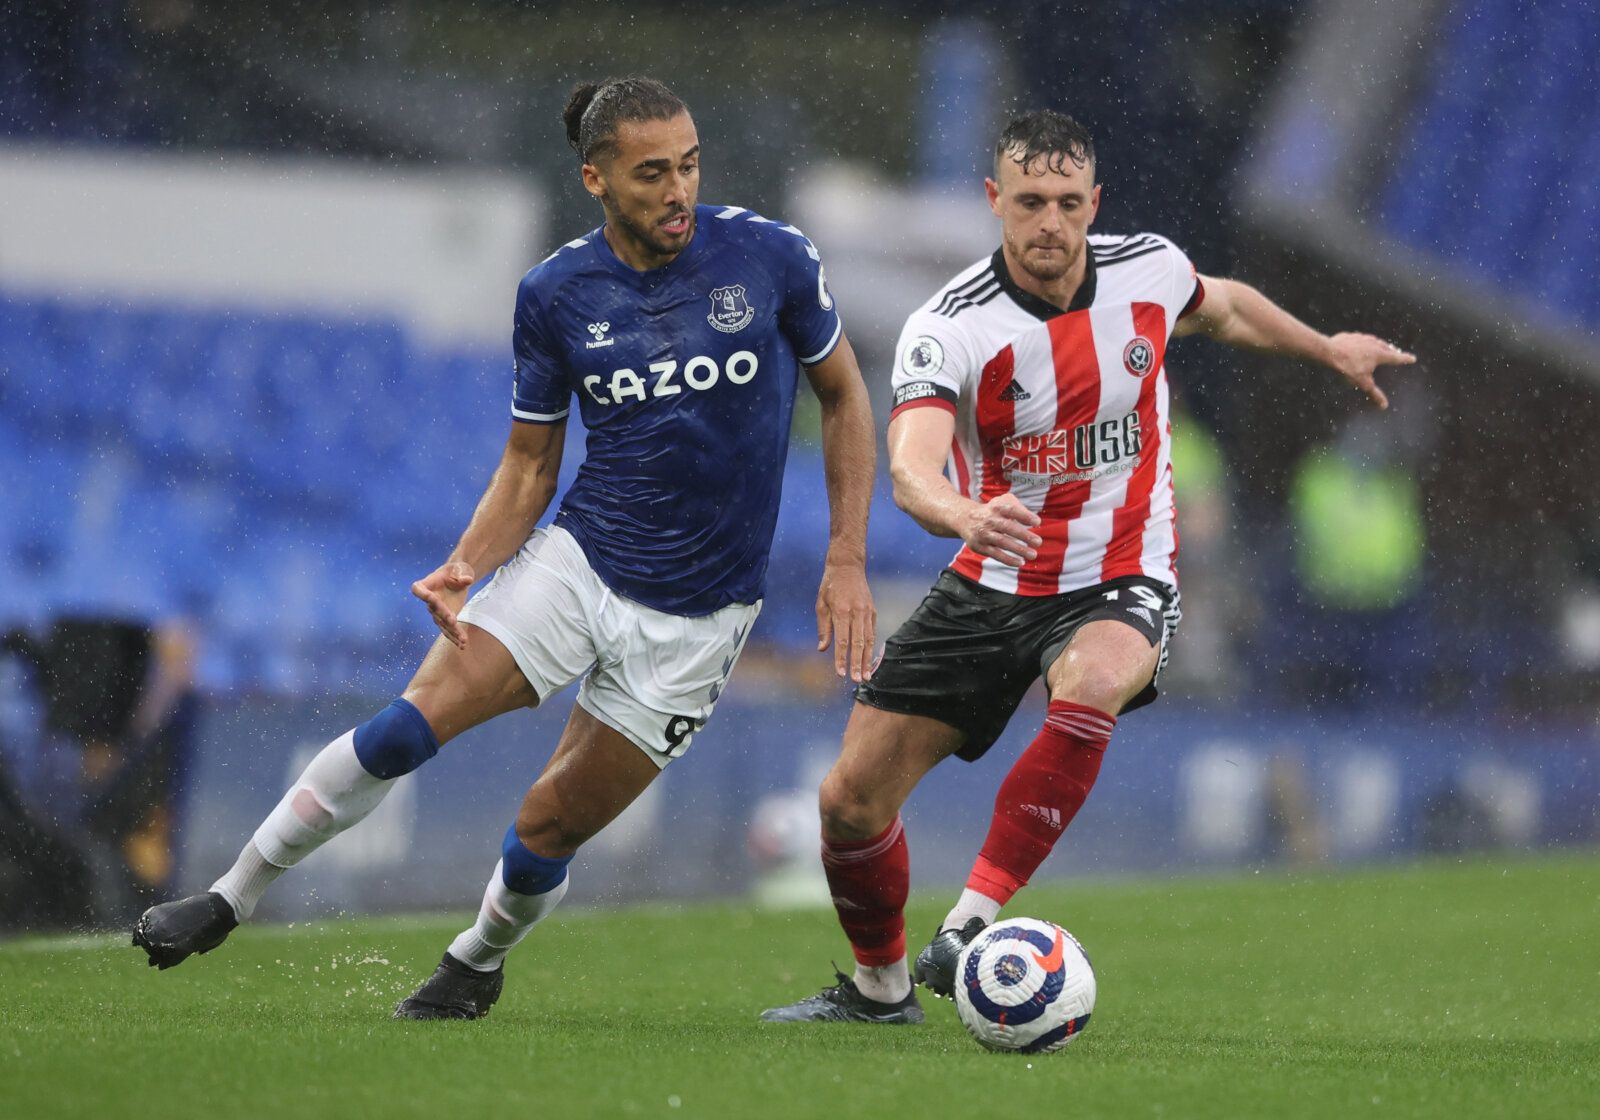 Soccer Football - Premier League - Everton v Sheffield United - Goodison Park, Liverpool, Britain - May 16, 2021 Everton's Dominic Calvert-Lewin in action with Sheffield United's Jack Robinson Pool via REUTERS/Alex Pantling EDITORIAL USE ONLY. No use with unauthorized audio, video, data, fixture lists, club/league logos or 'live' services. Online in-match use limited to 75 images, no video emulation. No use in betting, games or single club /league/player publications.  Please contact your accoun